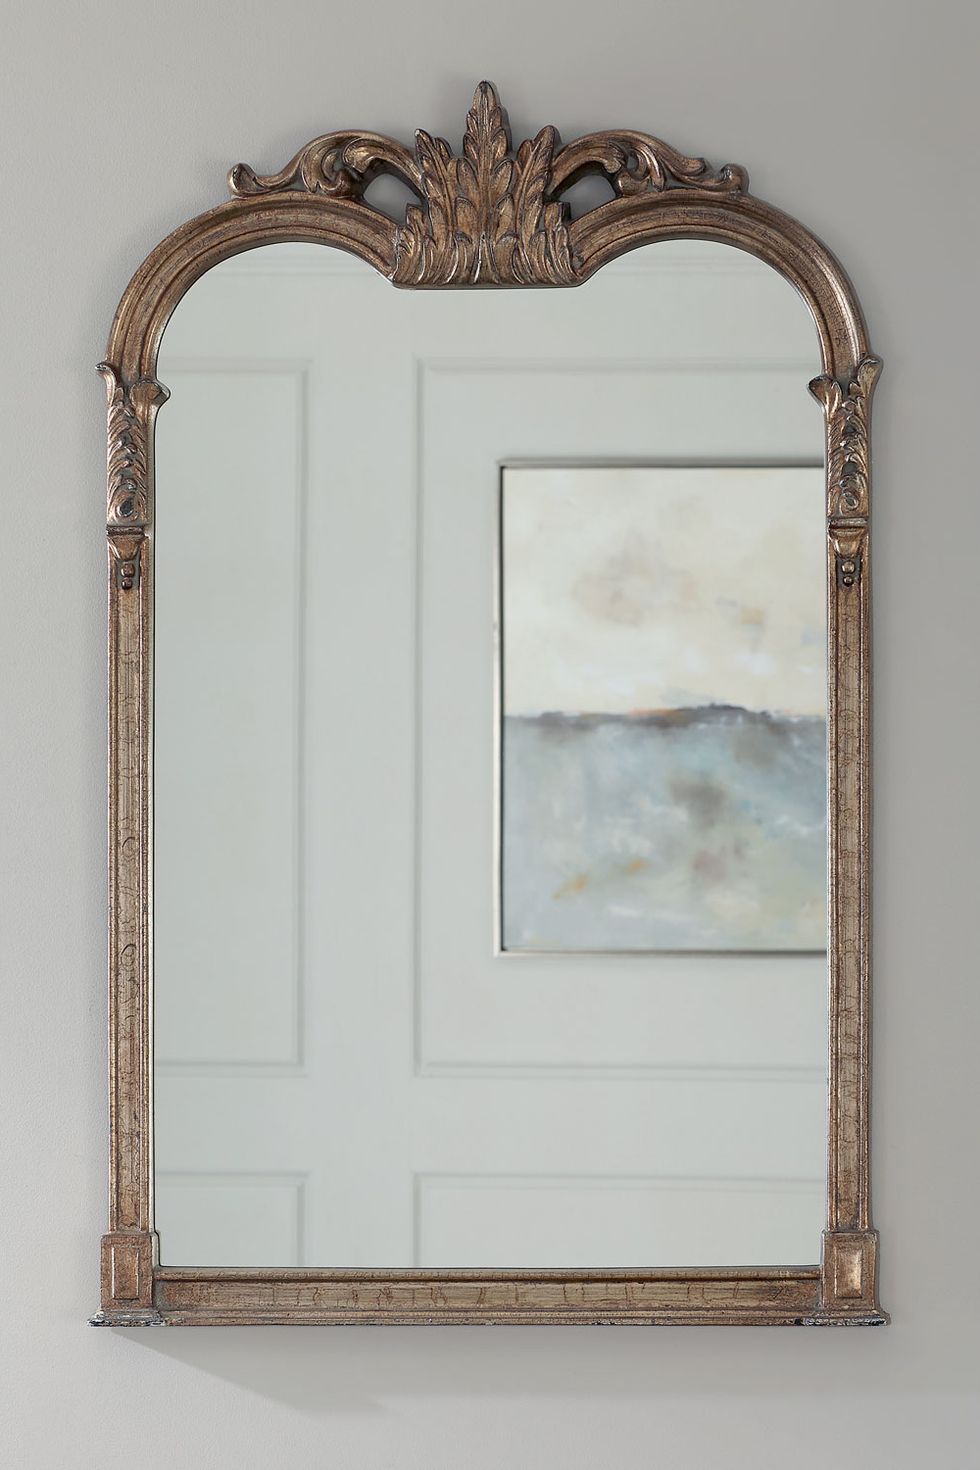 Get the Look: Small Jacqueline Mirror